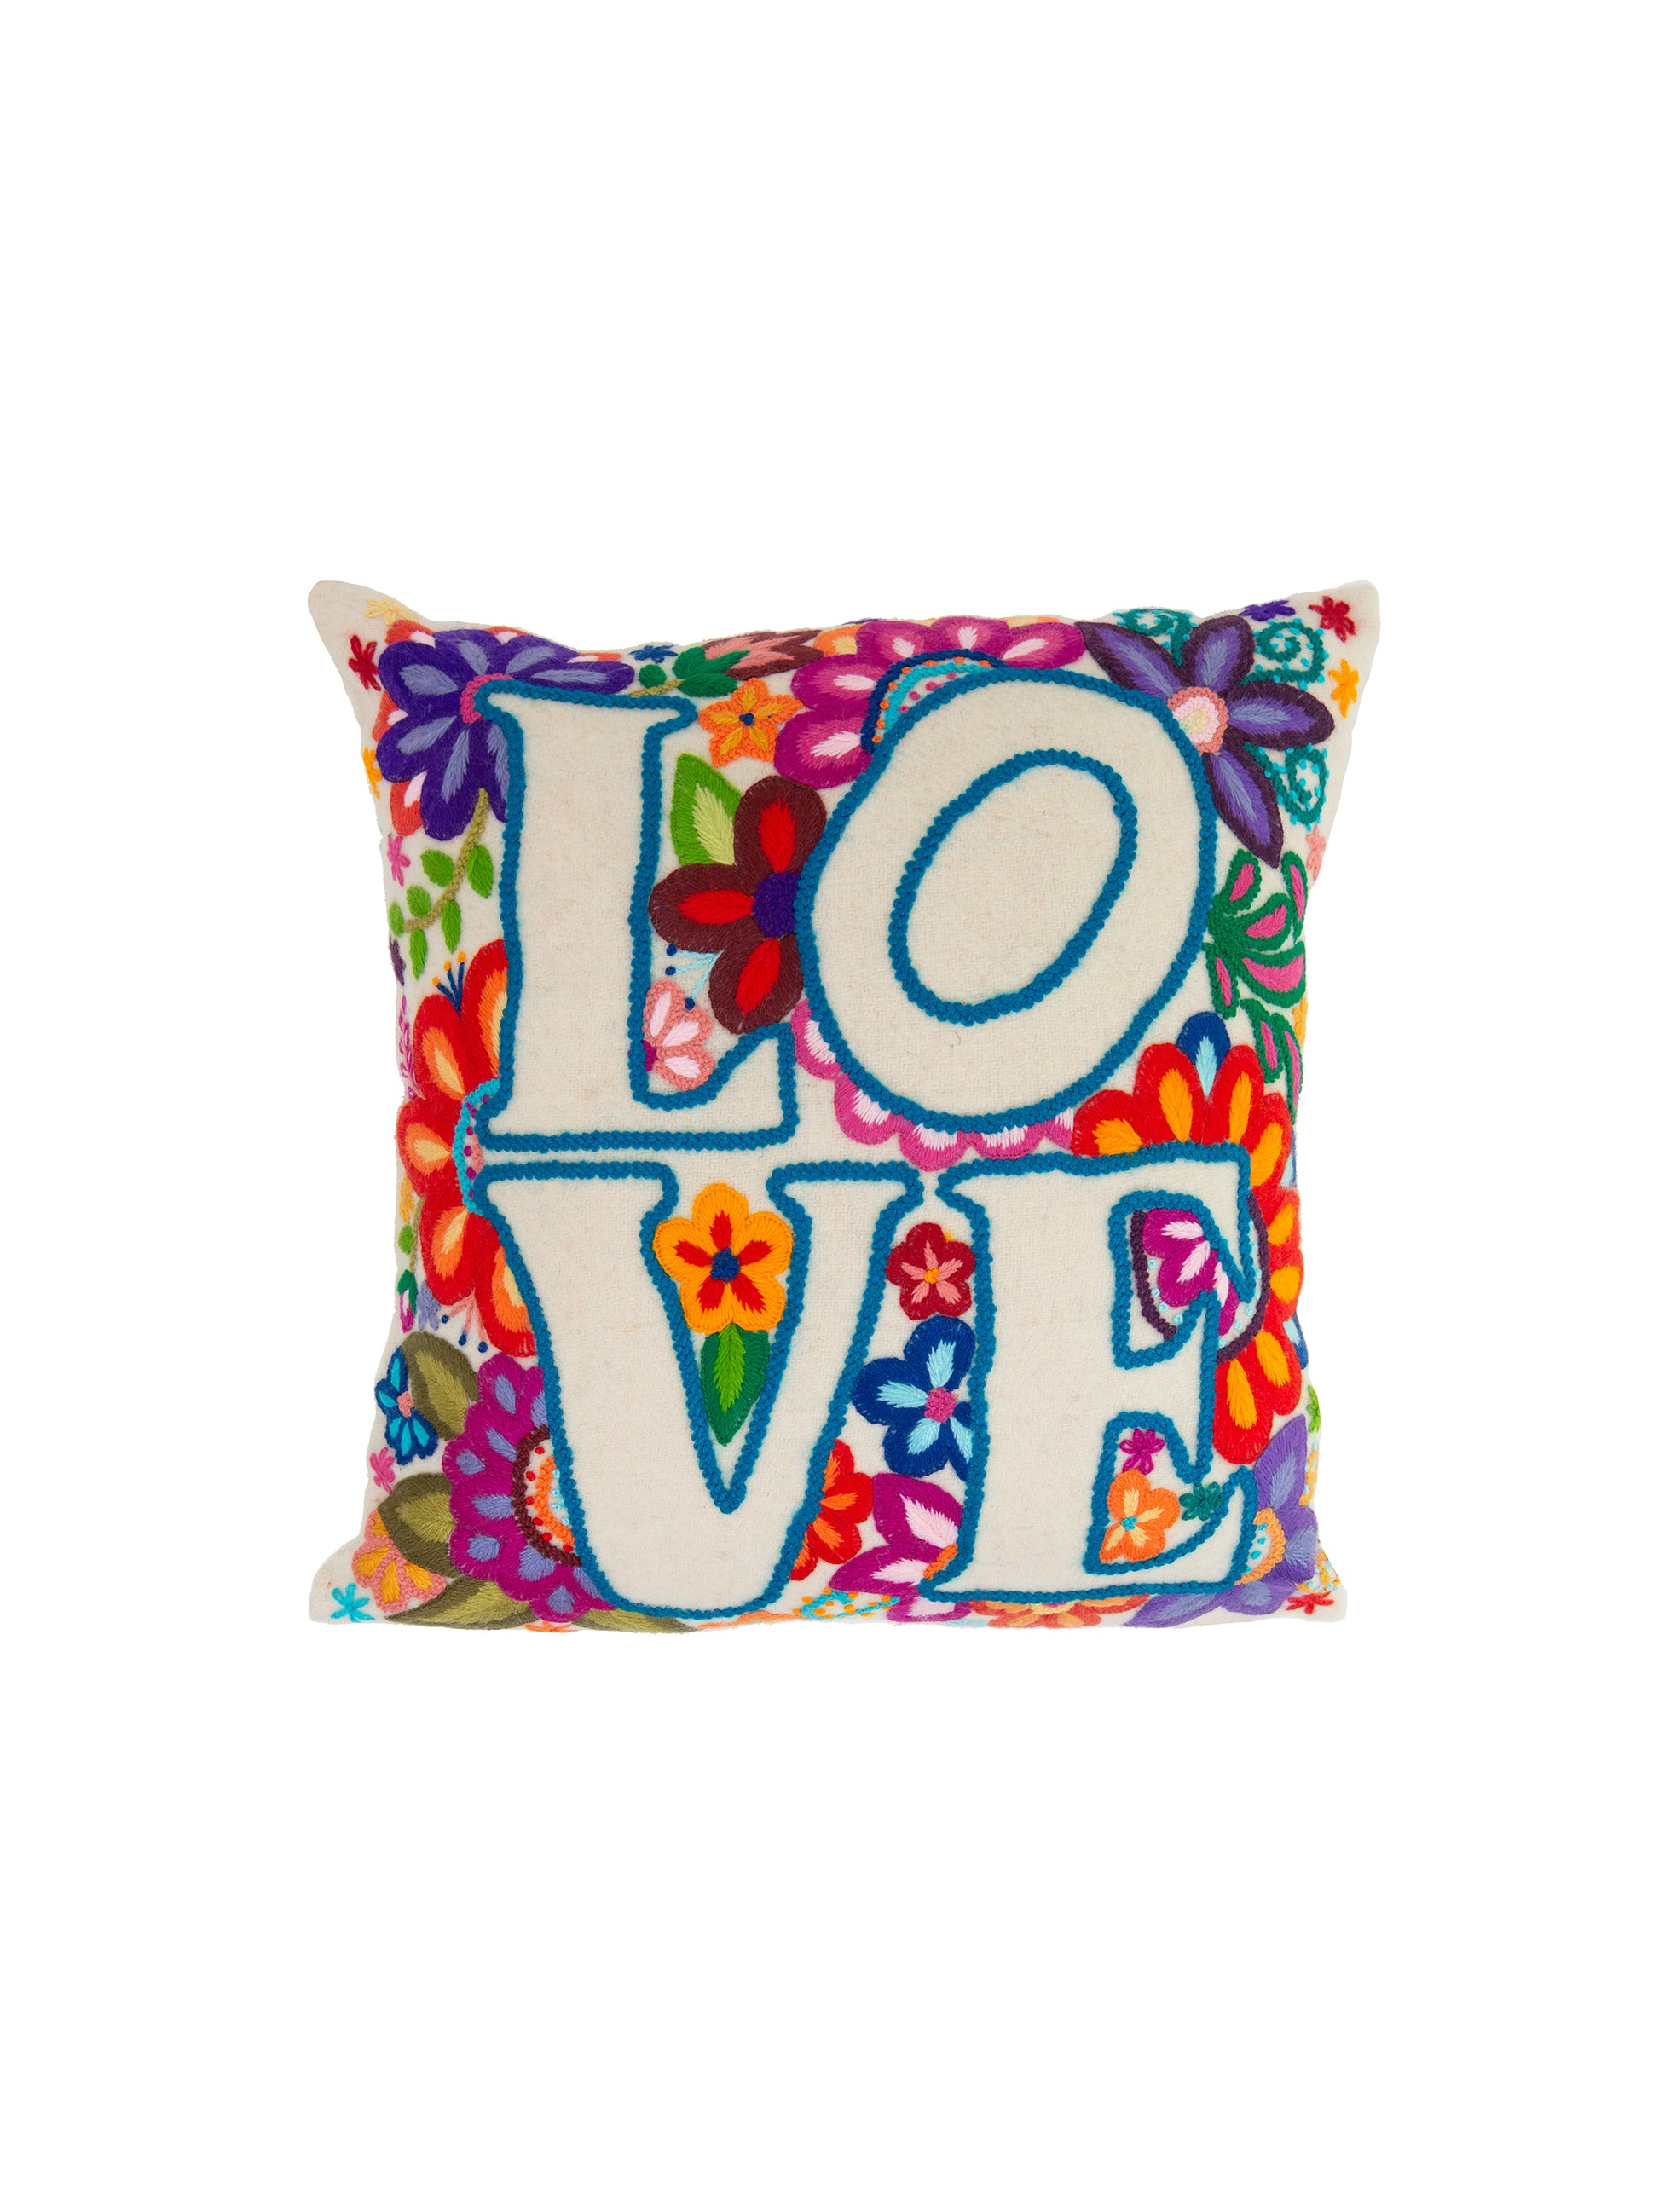 LOVE Embroidered Throw Pillow Weston Table